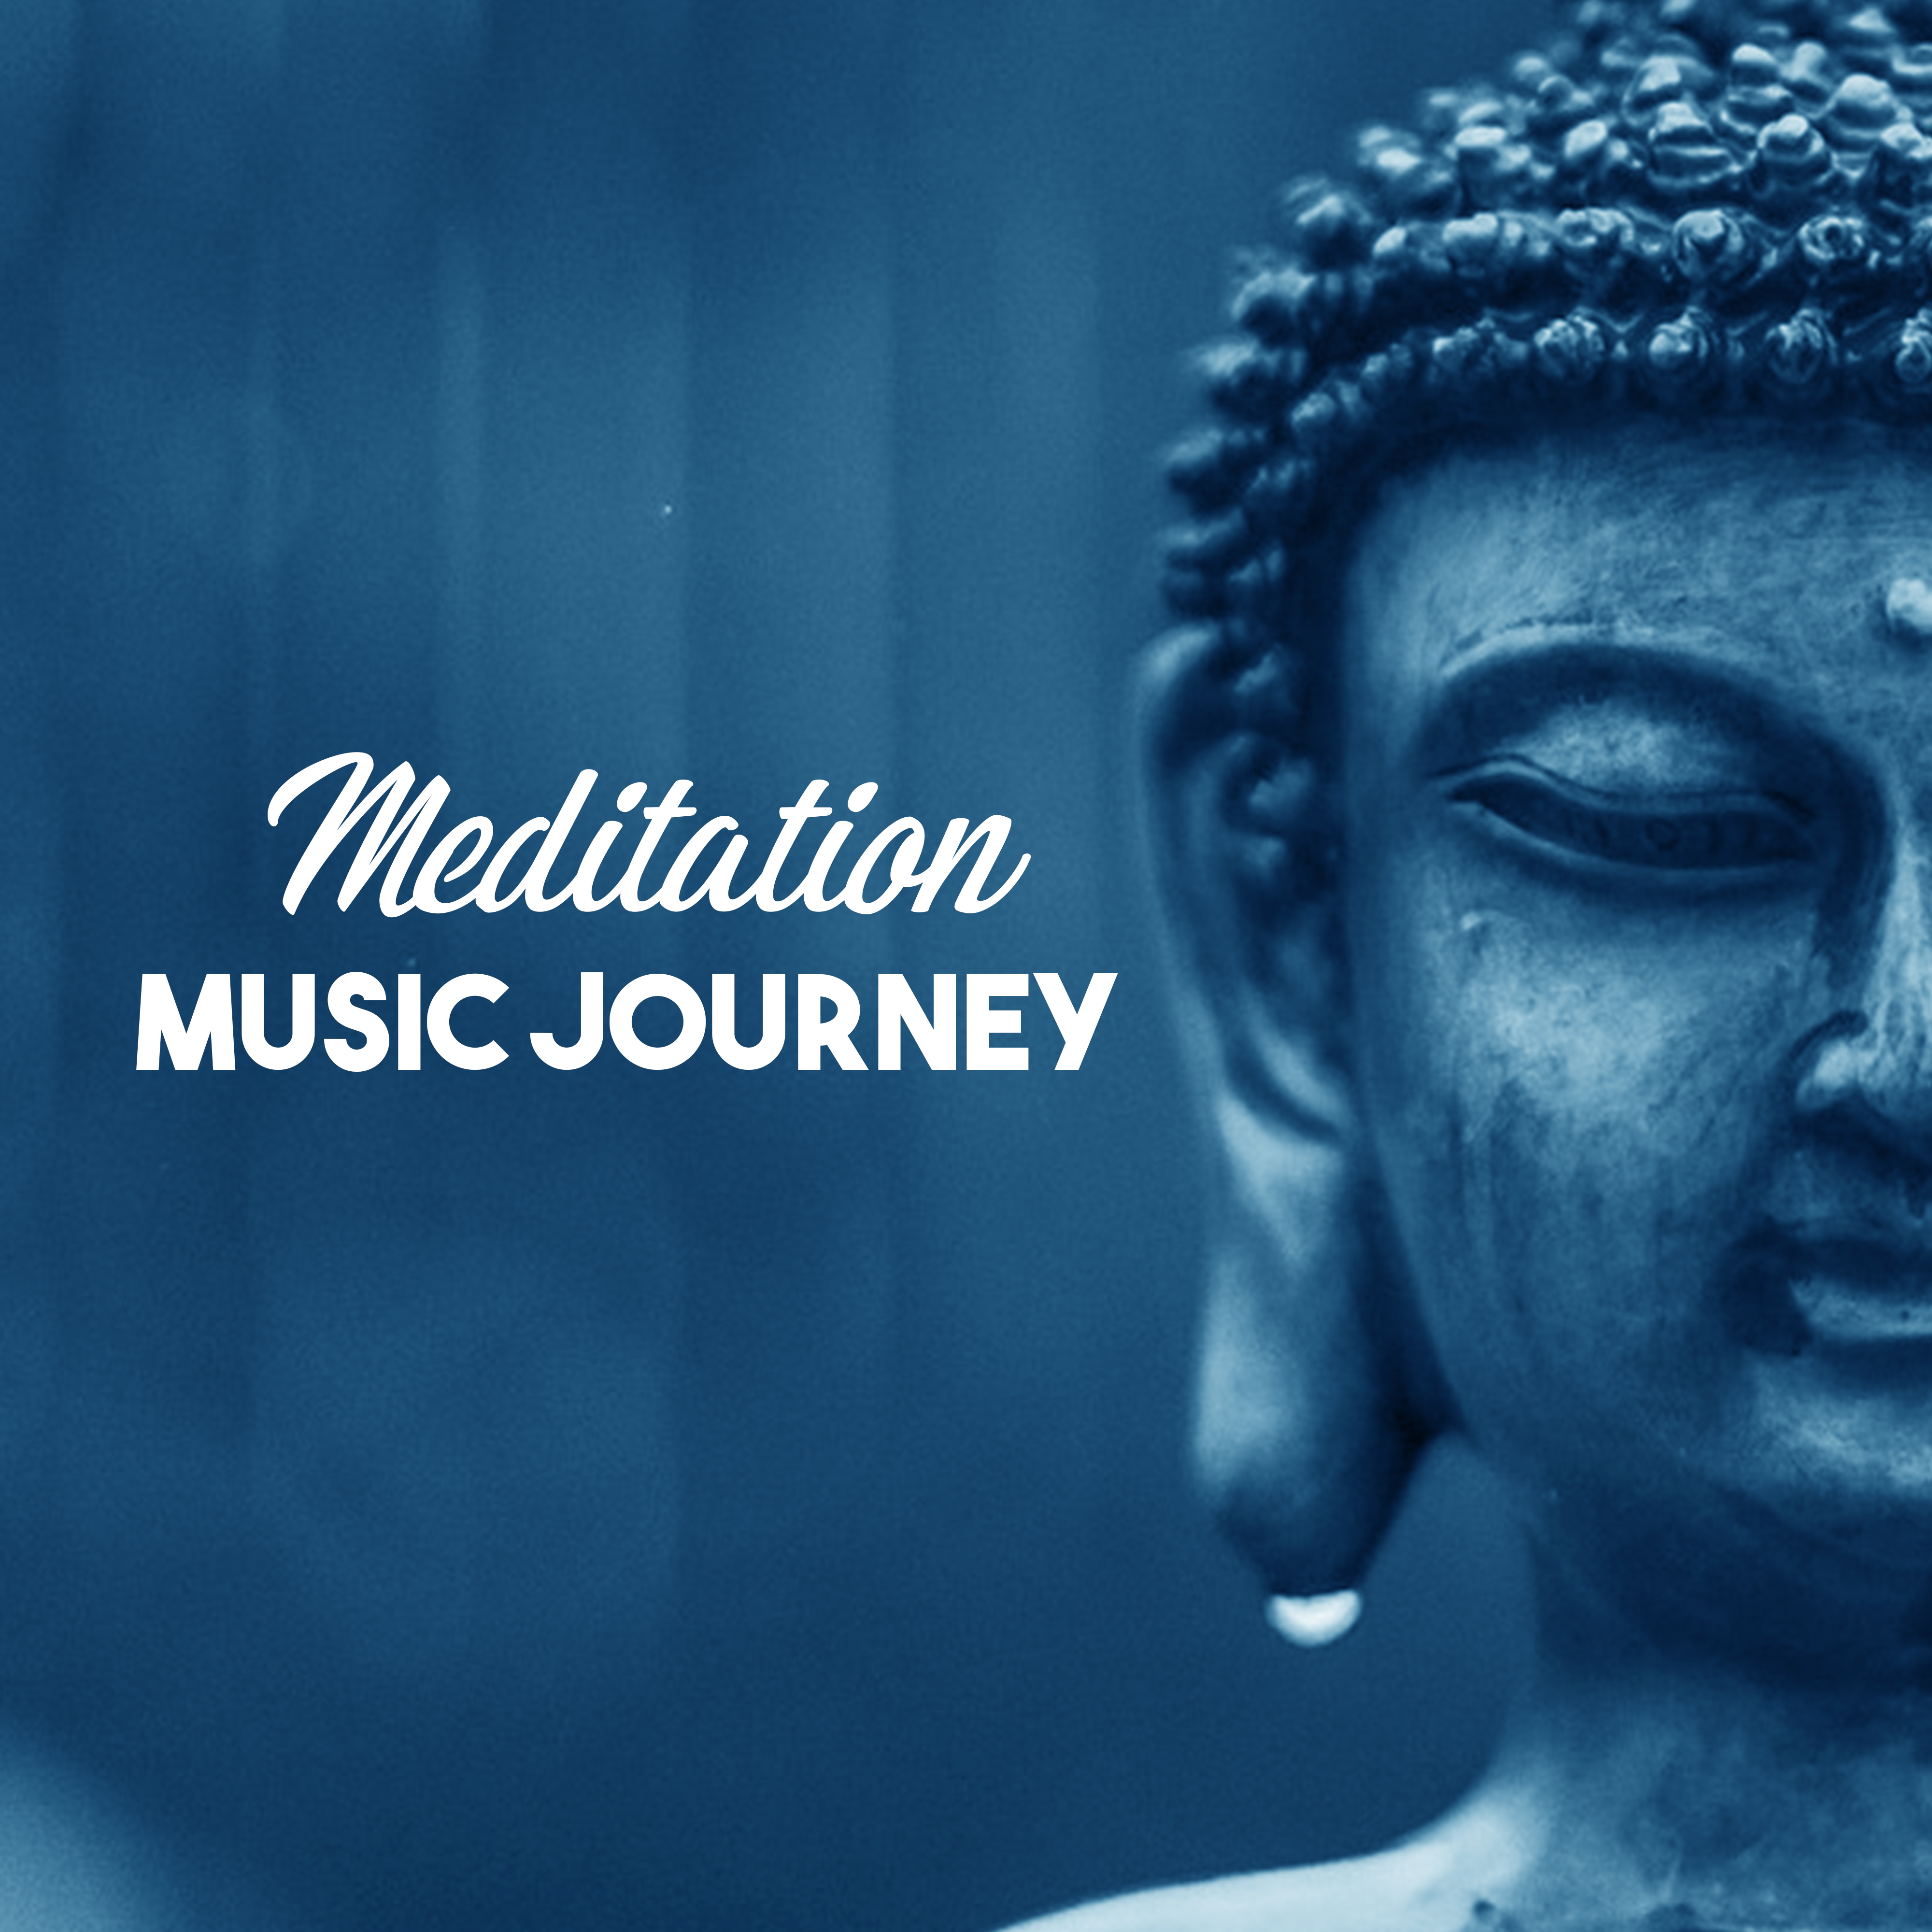 Meditation Music Journey – Calming Nature Sounds, Relaxation, Yoga Music, Pure Relaxation, Helpful for Contemplation